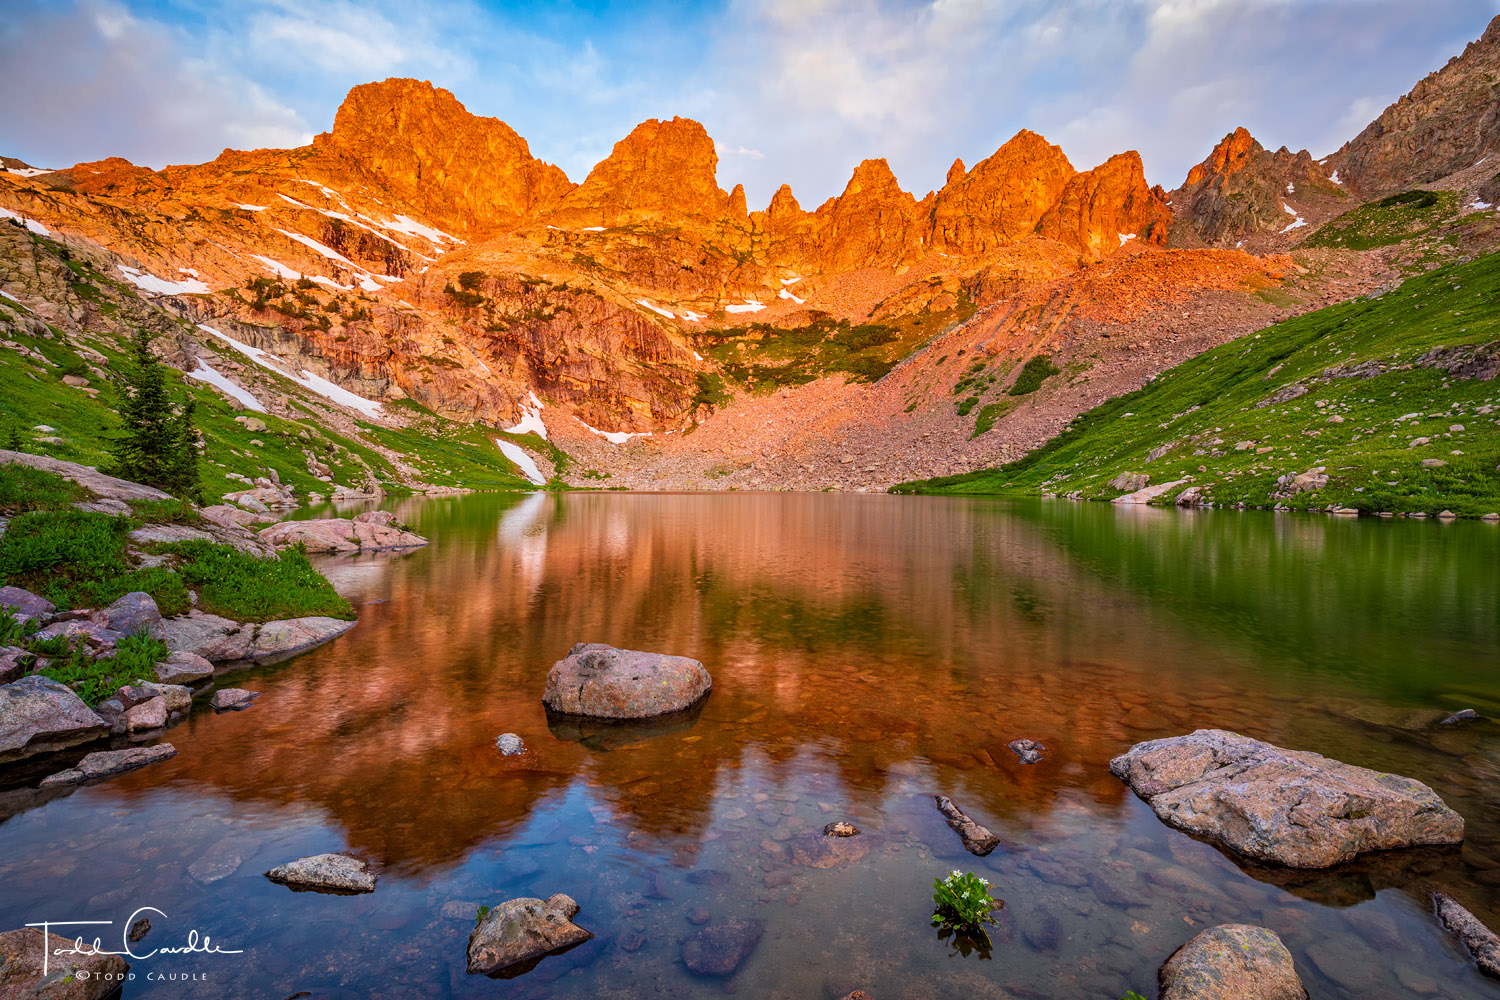 Spectacular Zodiac Ridge reflects in a lake deep in the Eagles Nest Wilderness at sunrise.